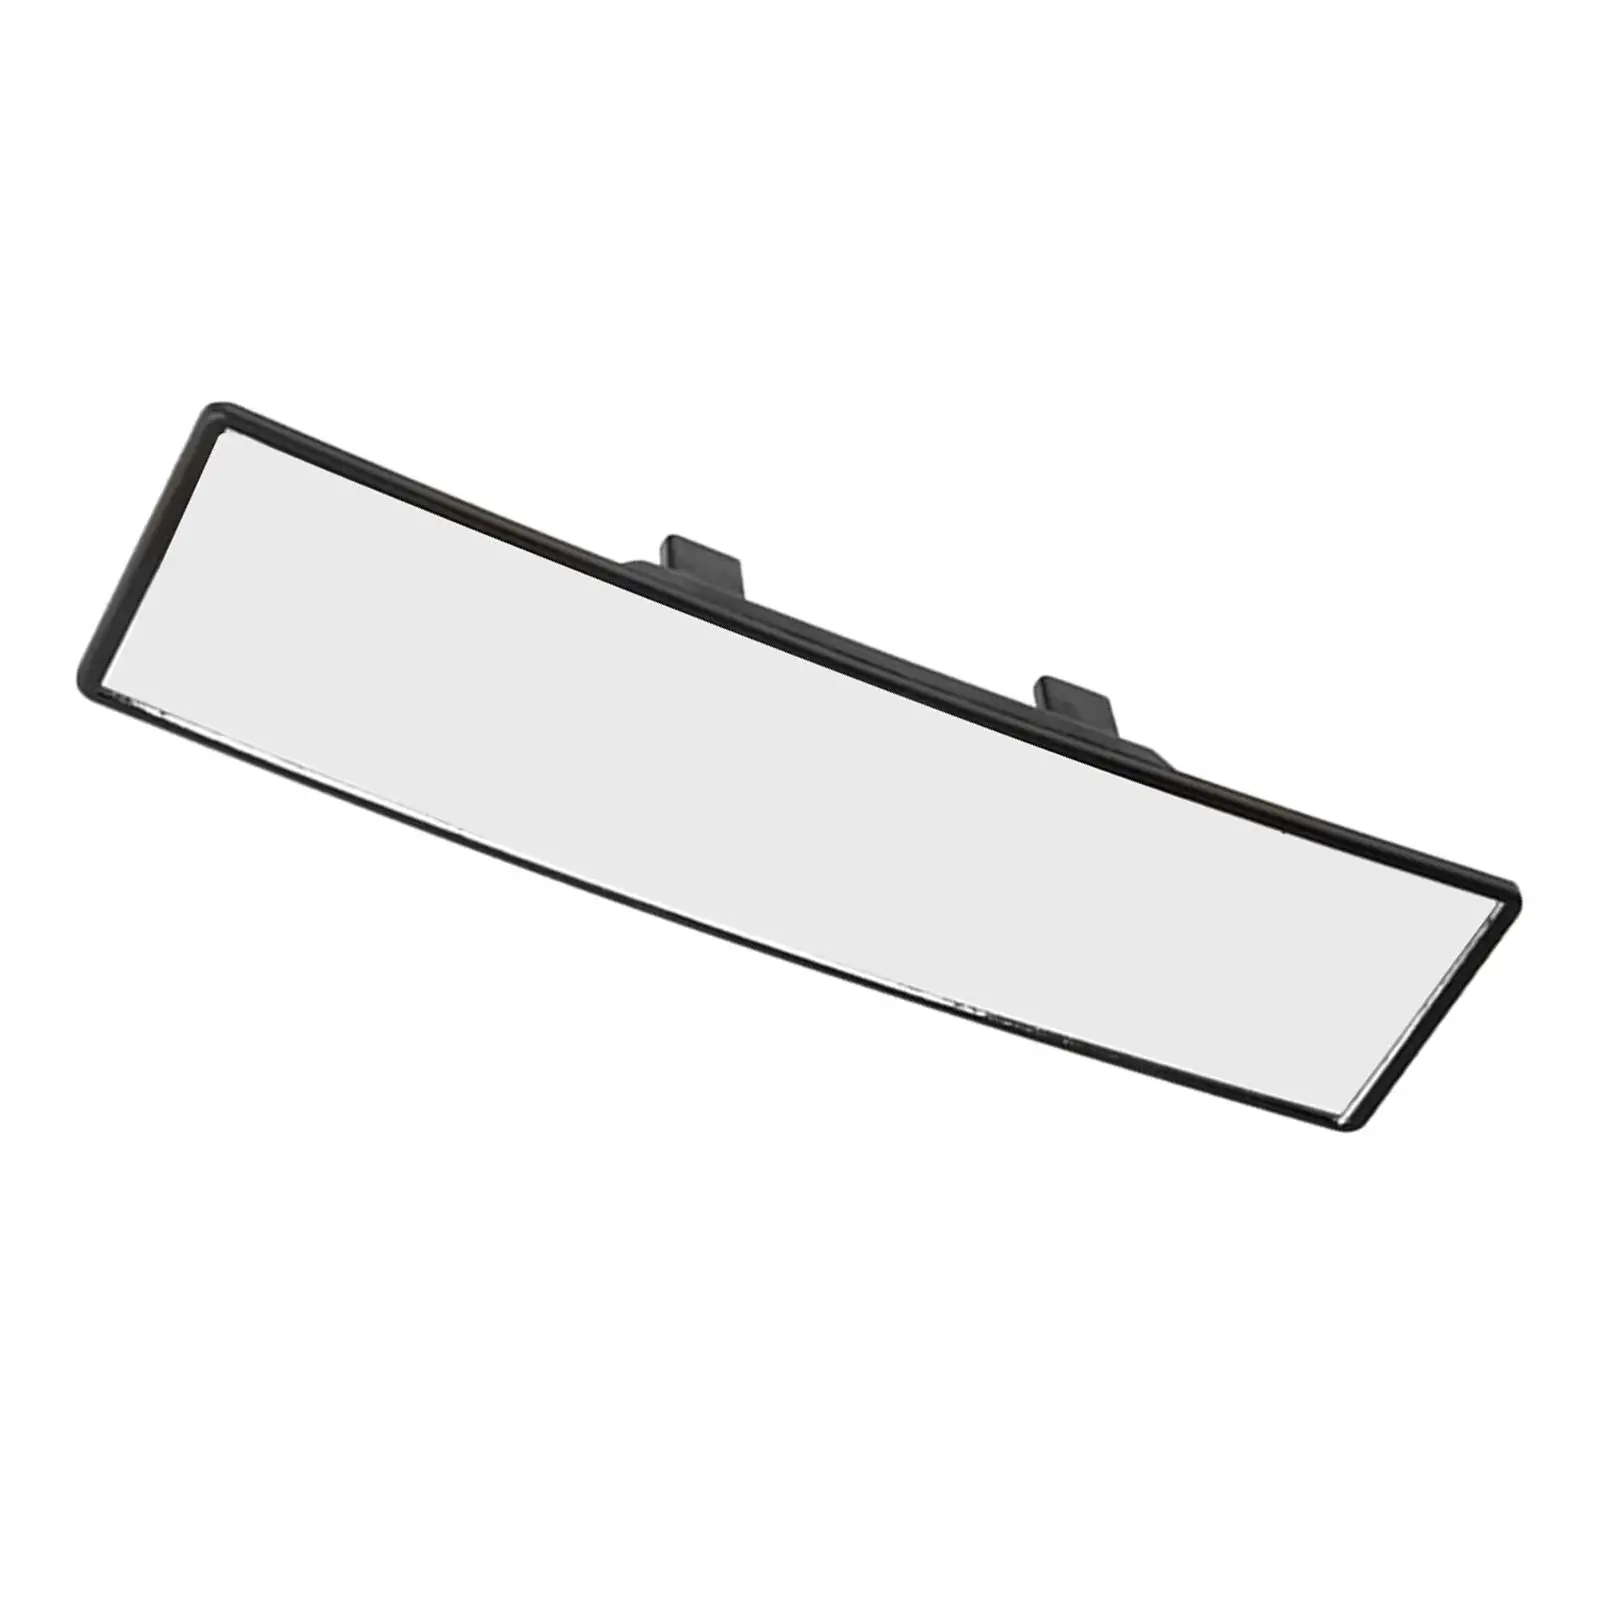 Rear View Mirror Reduces Blind Spot Wide Viewing Range Easy Installation Panoramic Rearview Mirror for Van Trucks Vehicles